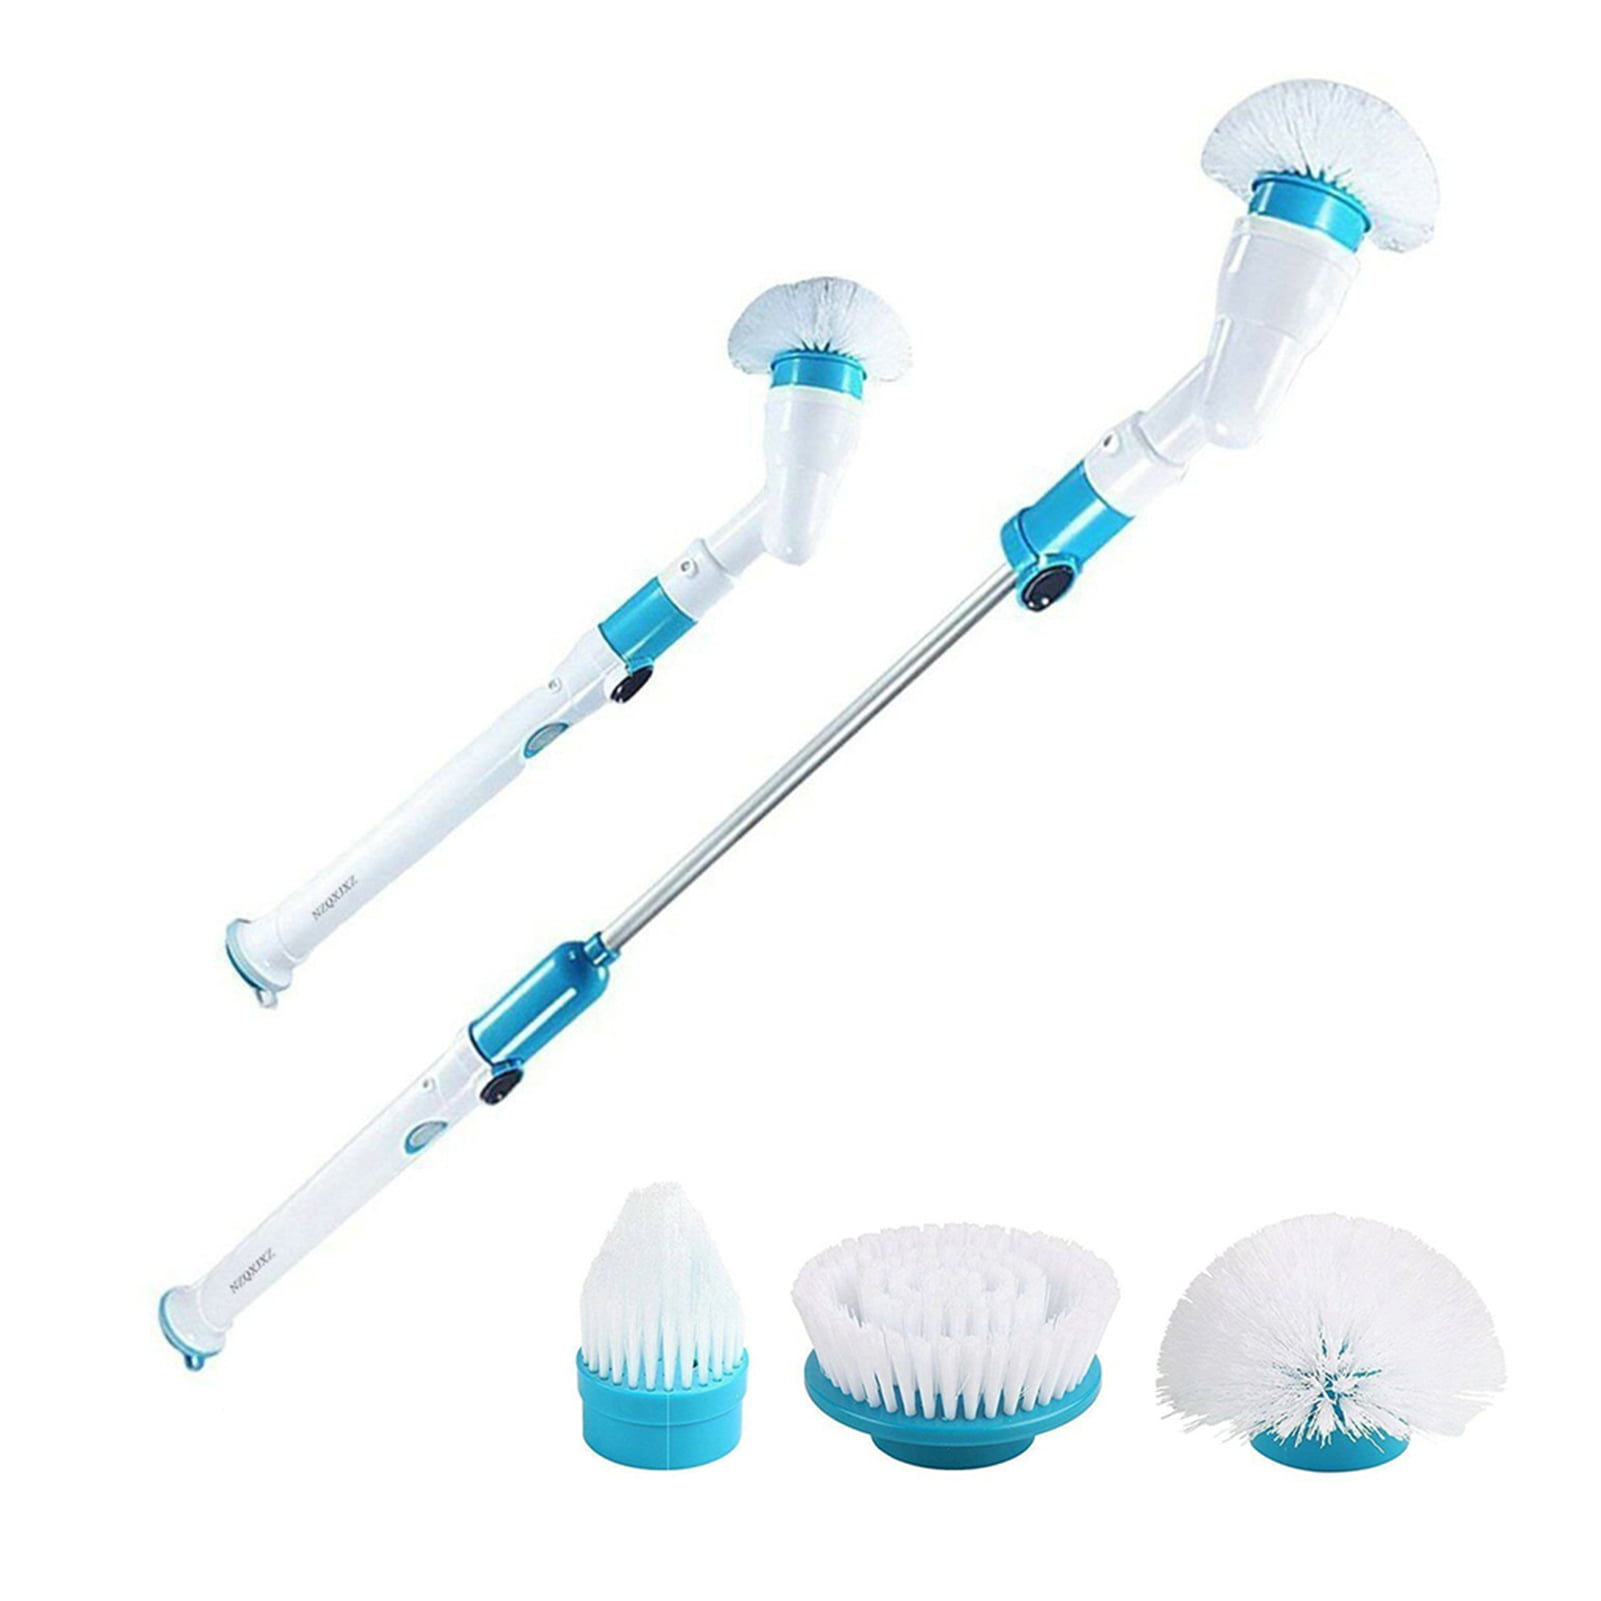 Electric Spin Scrubber Cordless Scrubber with 3 Replaceable Cleaning Brush Heads 